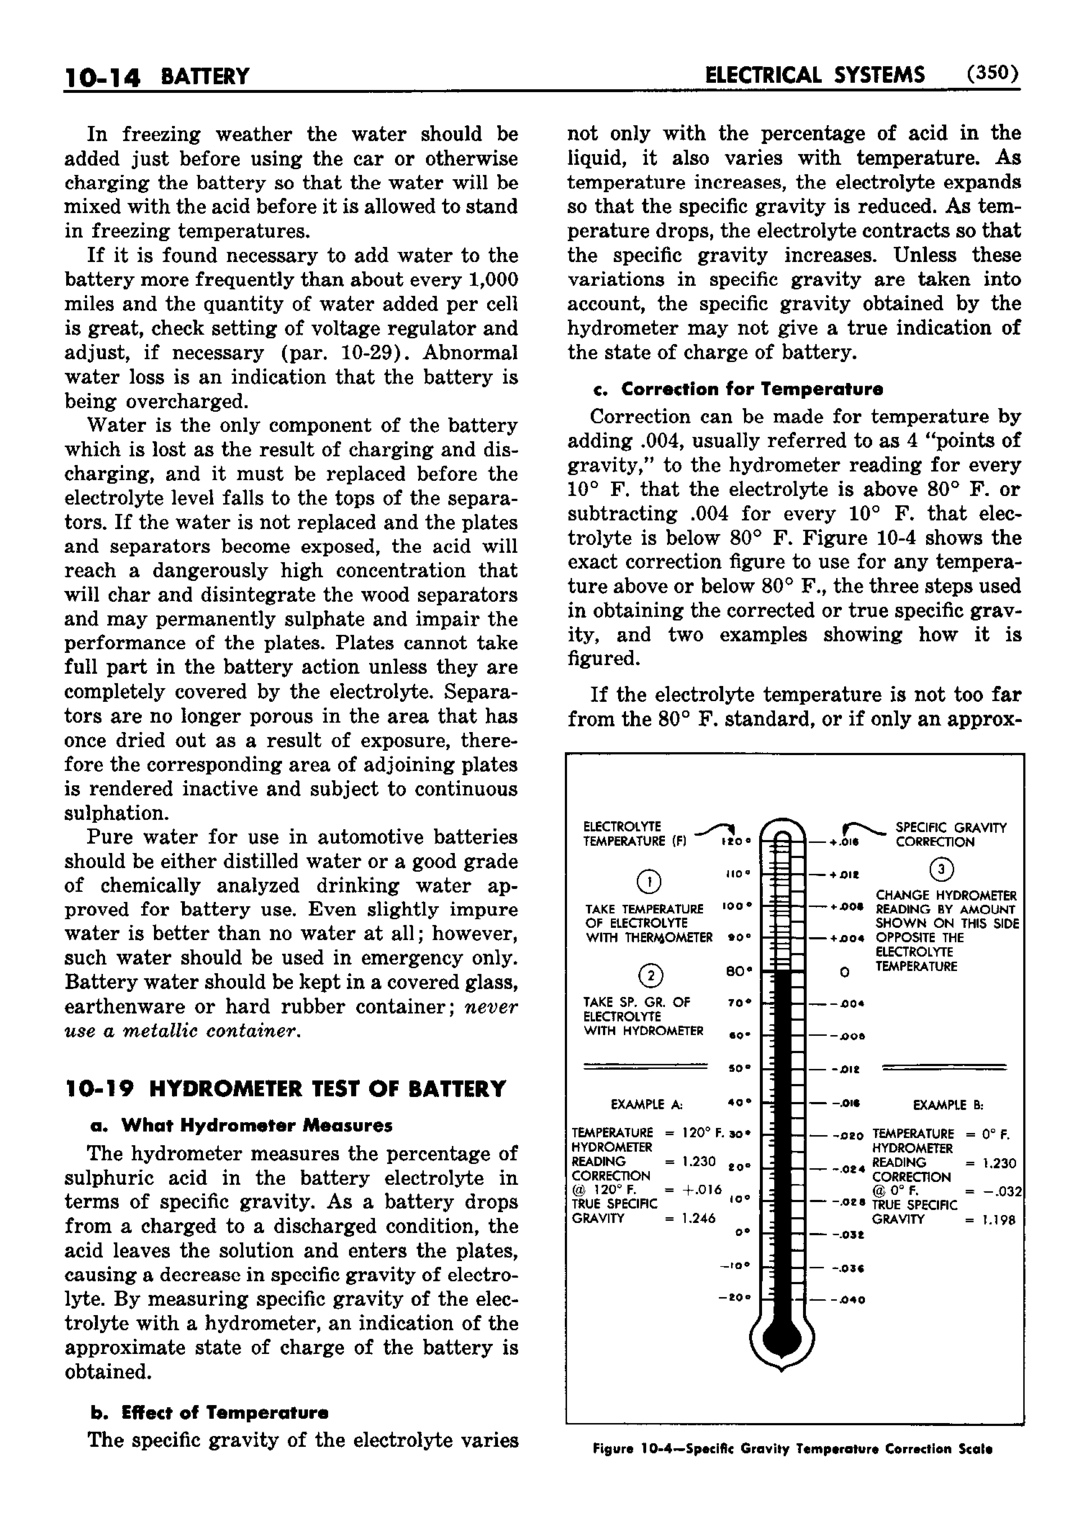 n_11 1952 Buick Shop Manual - Electrical Systems-014-014.jpg